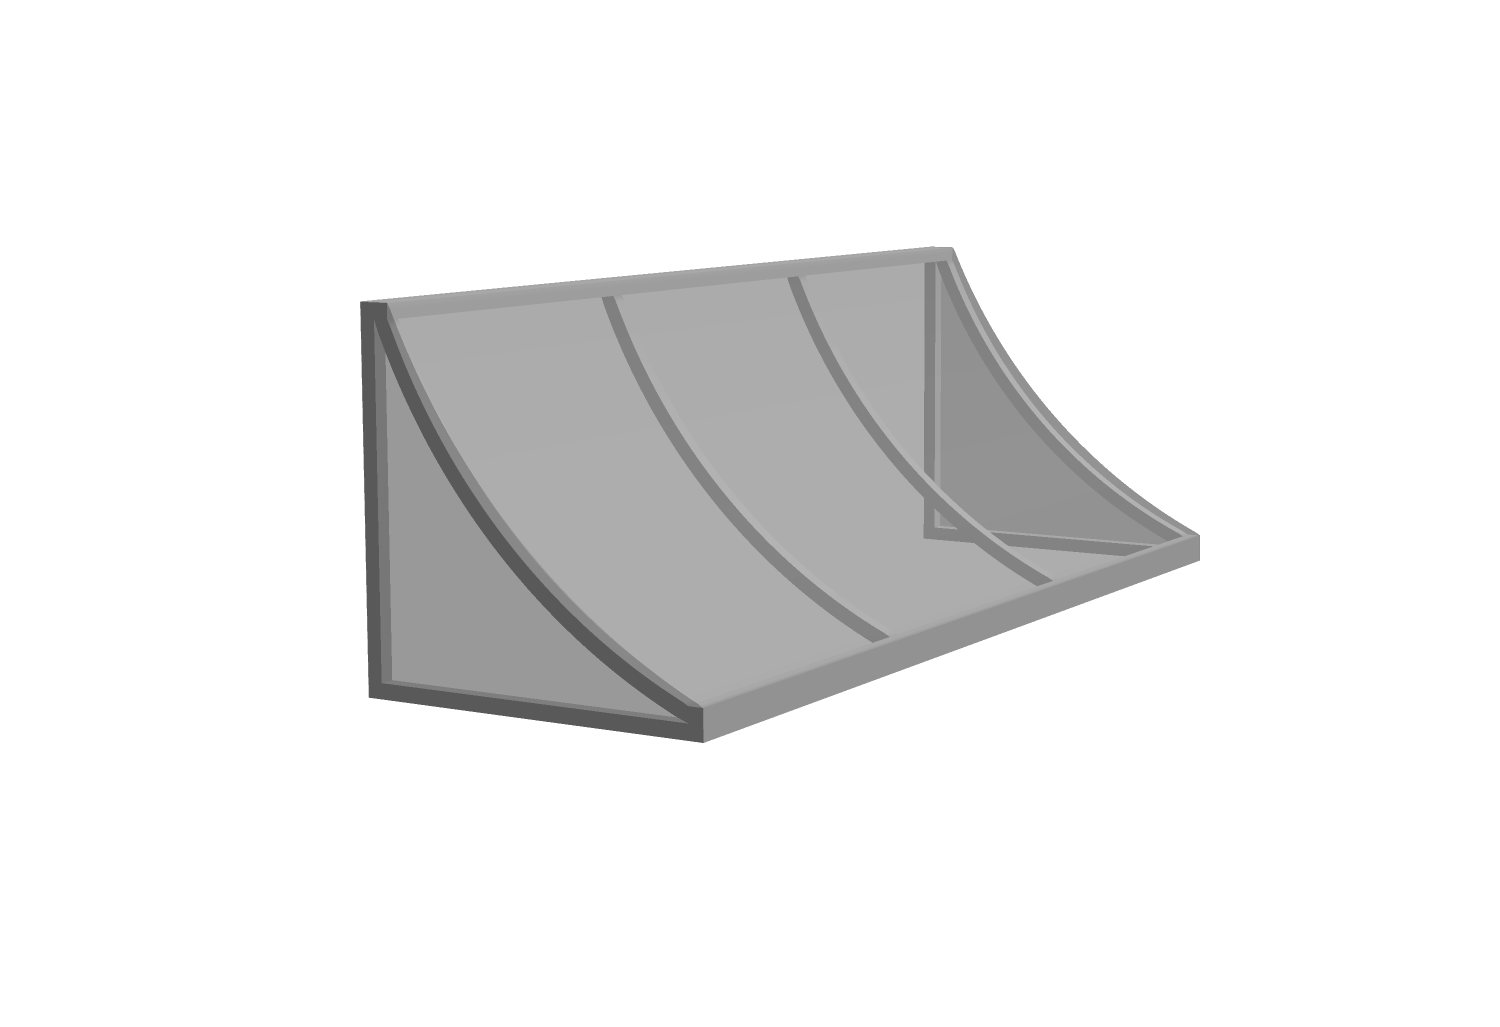 3D model of a concave awning